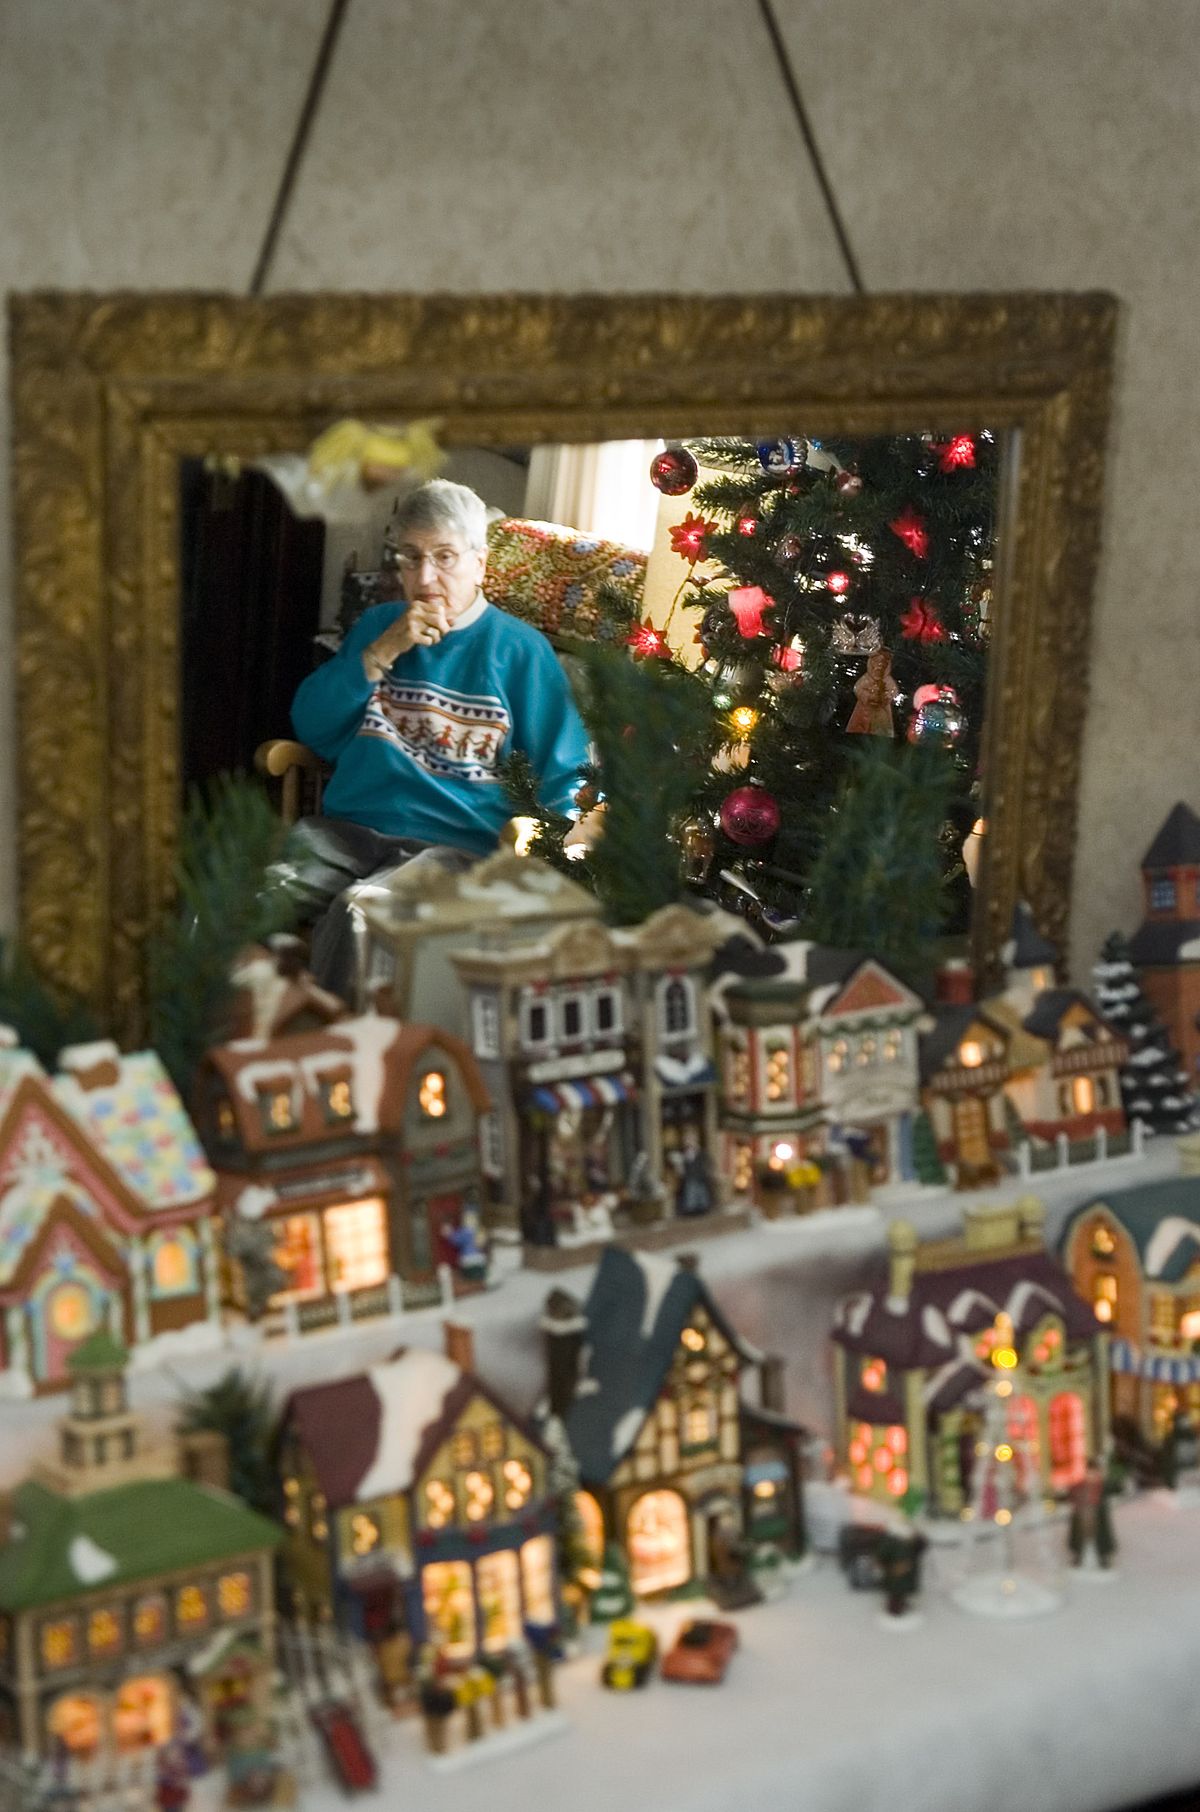 Virginia Danke goes all-out for Christmas and fills her Spokane  home with ornaments and decorations. She is shown near her tree,  admiring the lights and sounds of Christmas.chrisa@spokesman.com (CHRISTOPHER ANDERSON)